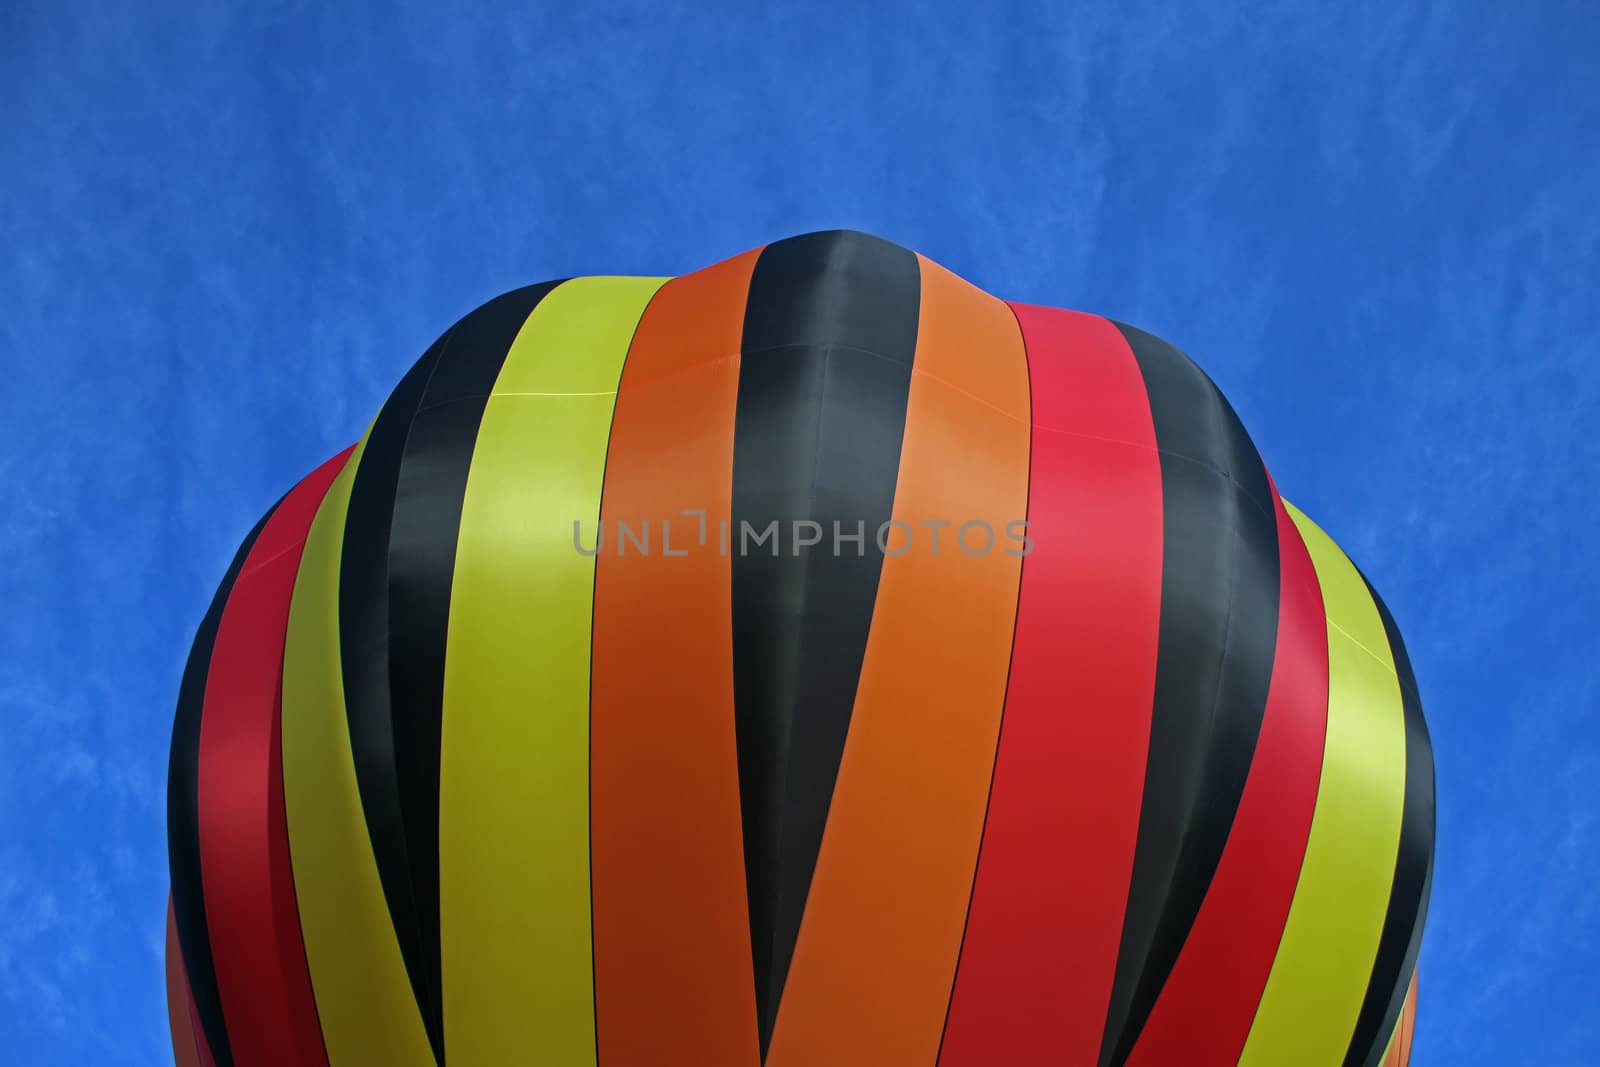 Hot air balloon on blue background with red black and yellow highlights.